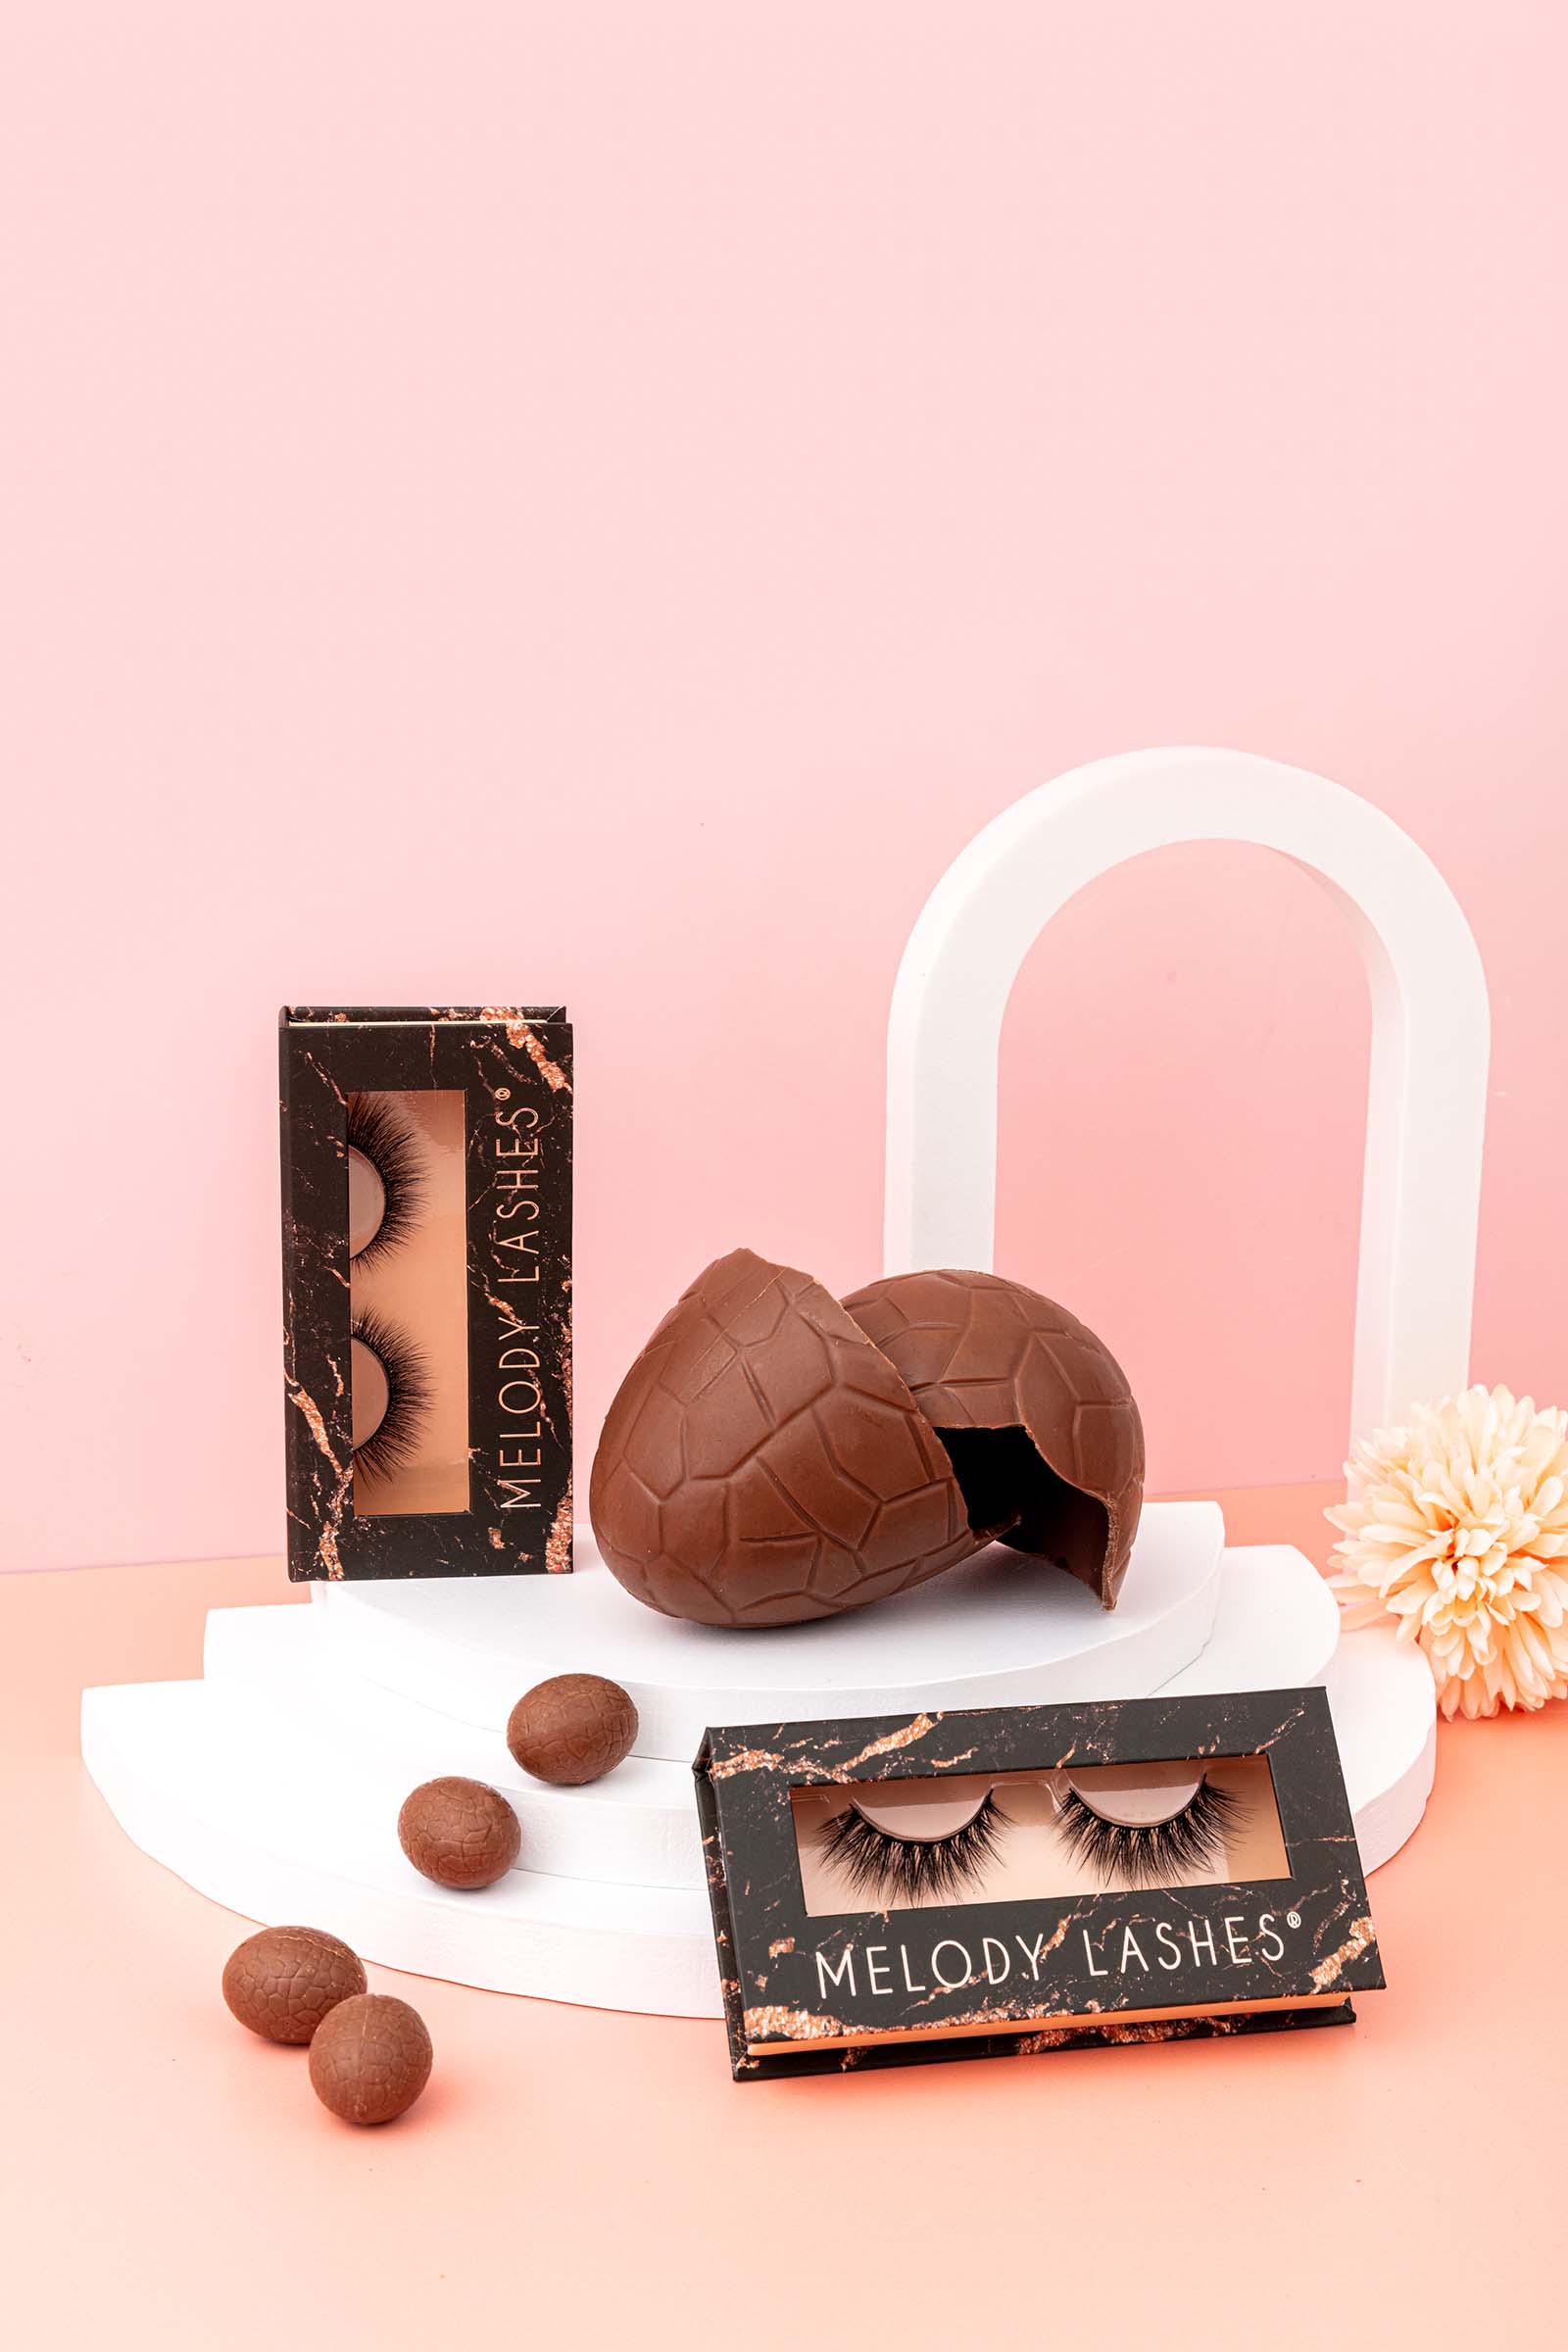 Easter Product Photography for a Lash Brand. Creative Product Stills by Megs at Colourpop Studio